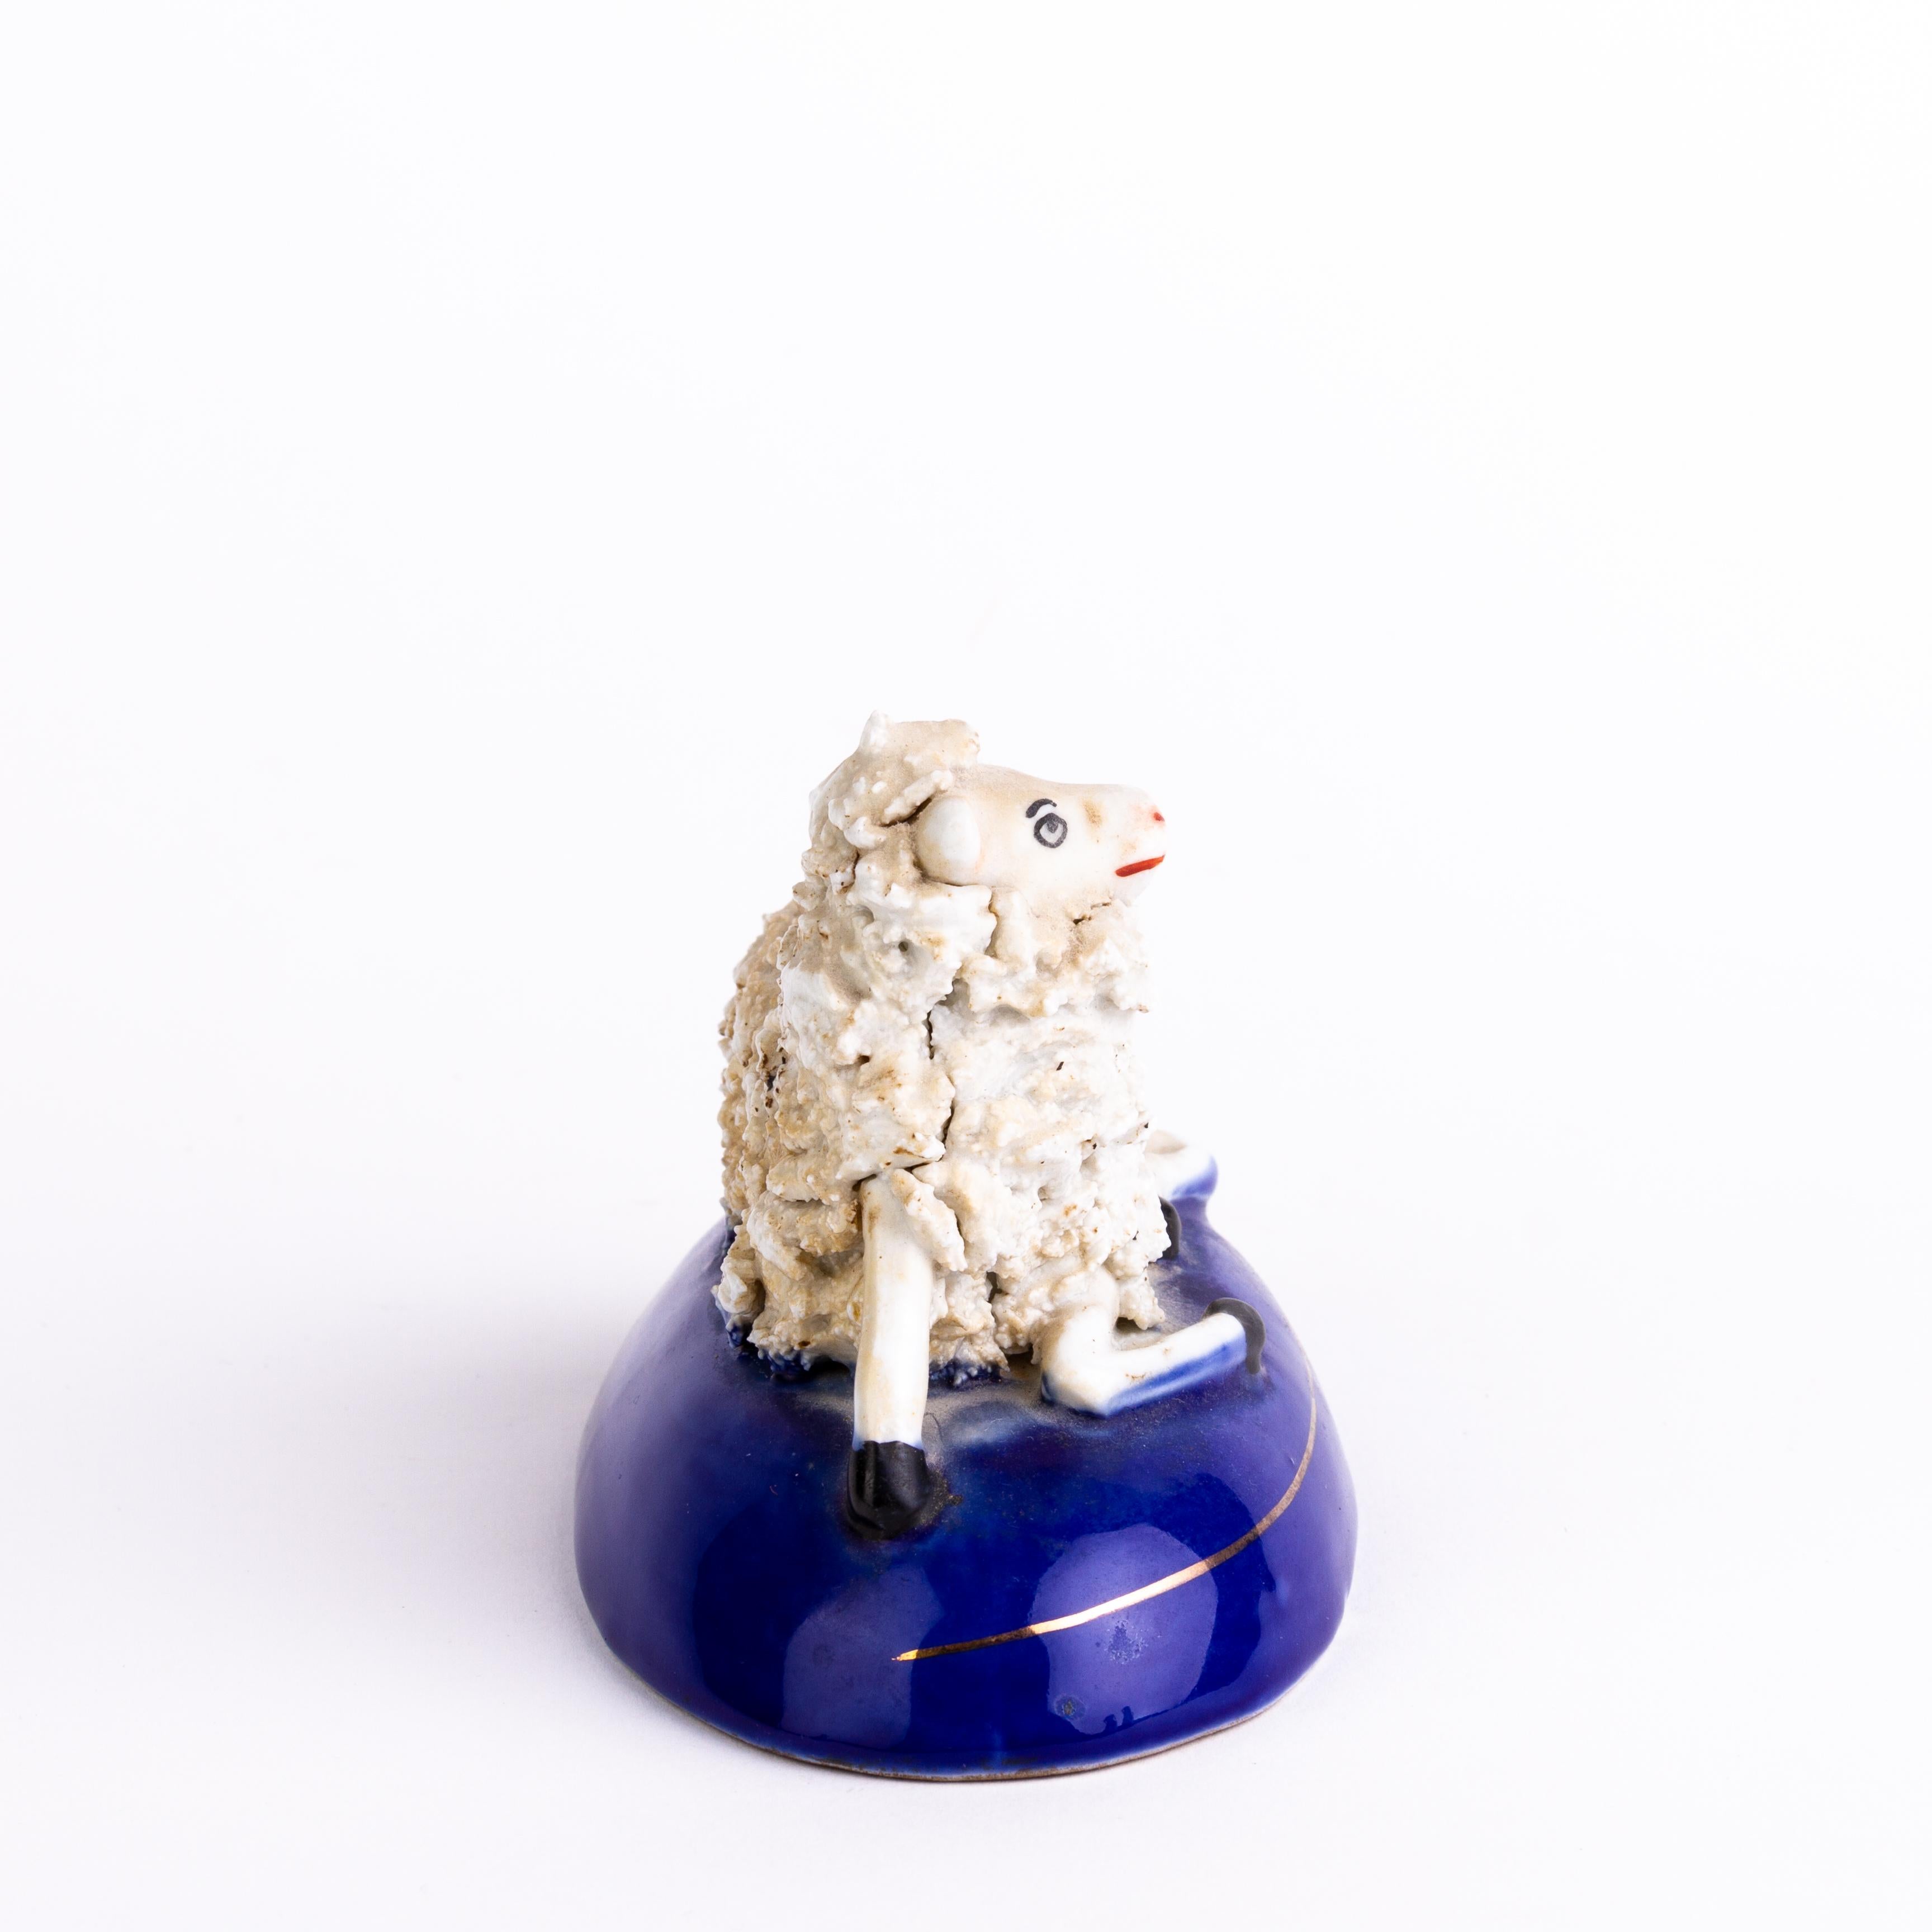 Staffordshire Polychrome Pottery Sheep Figure 19th Century 
Good condition
Free international shipping.